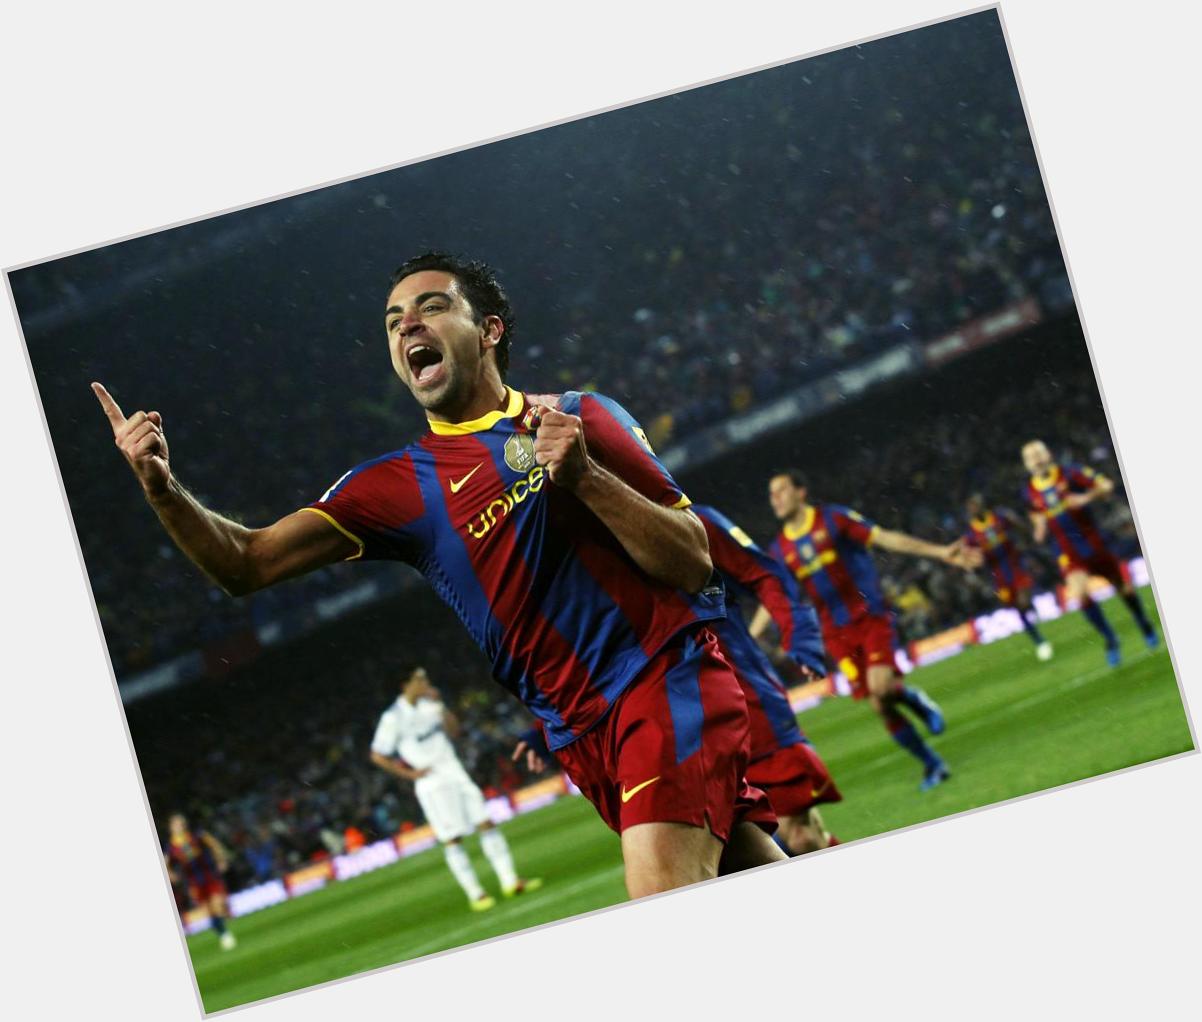 Happy 35th Birthday to Xavi Hernandez. The captain and legend of FC Barcelona and World Cup winner with Spain! 